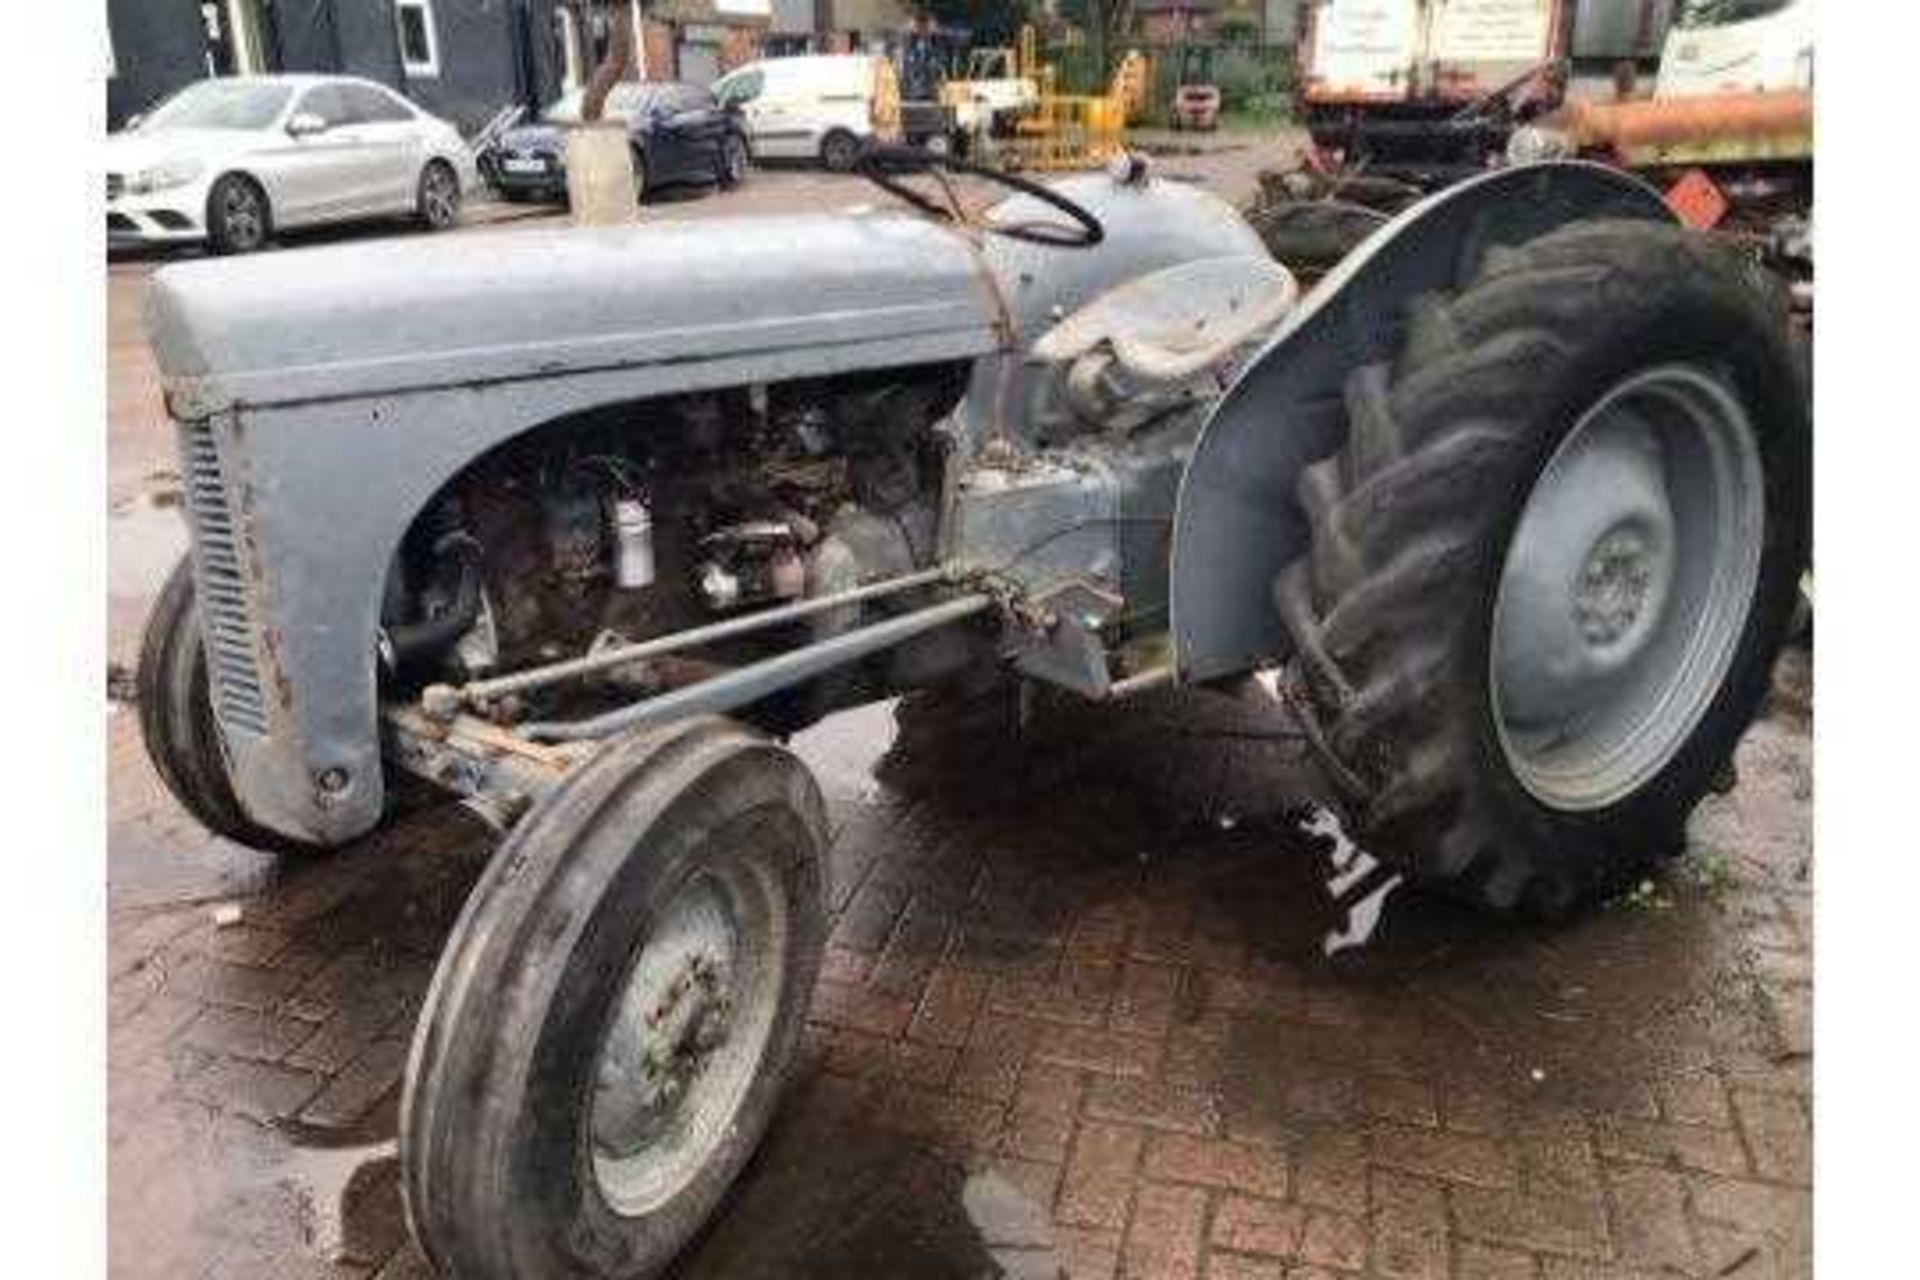 Massey Ferguson 35X Tractor, 2wd, manual PTO, currently in Selby (Yorks) due to transport issues and